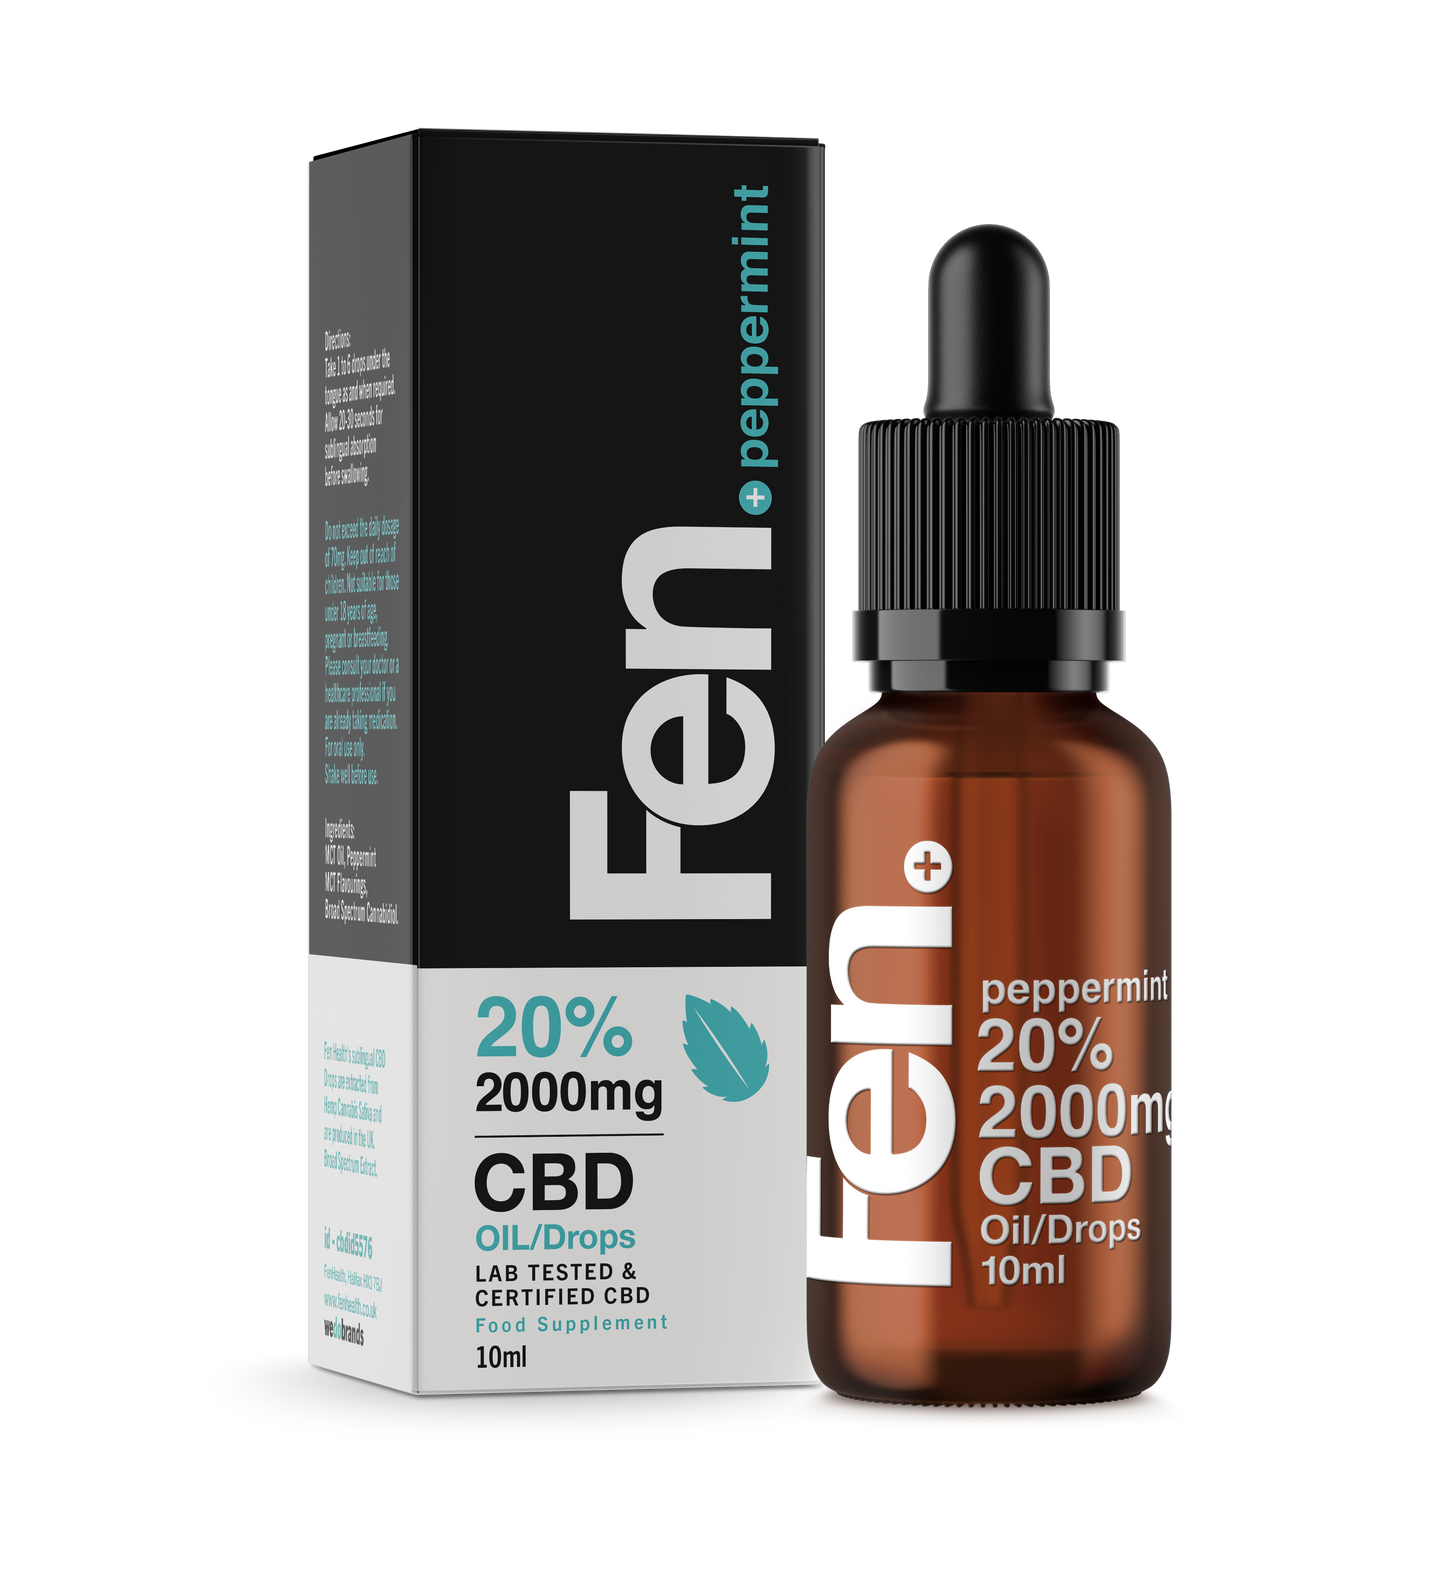 CBD Oil Drops: Peppermint Flavor front facing view of 20% packet for secondary doseage